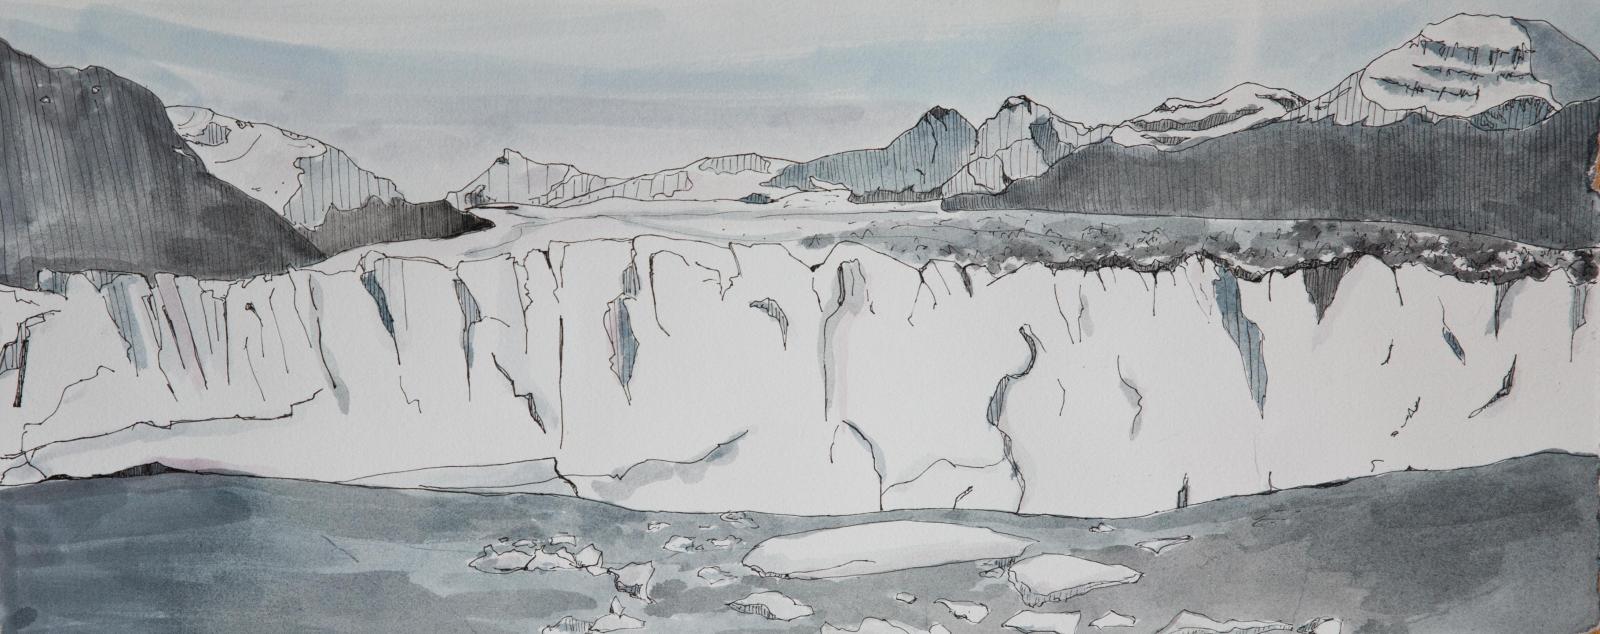 Image from glacial landscapes